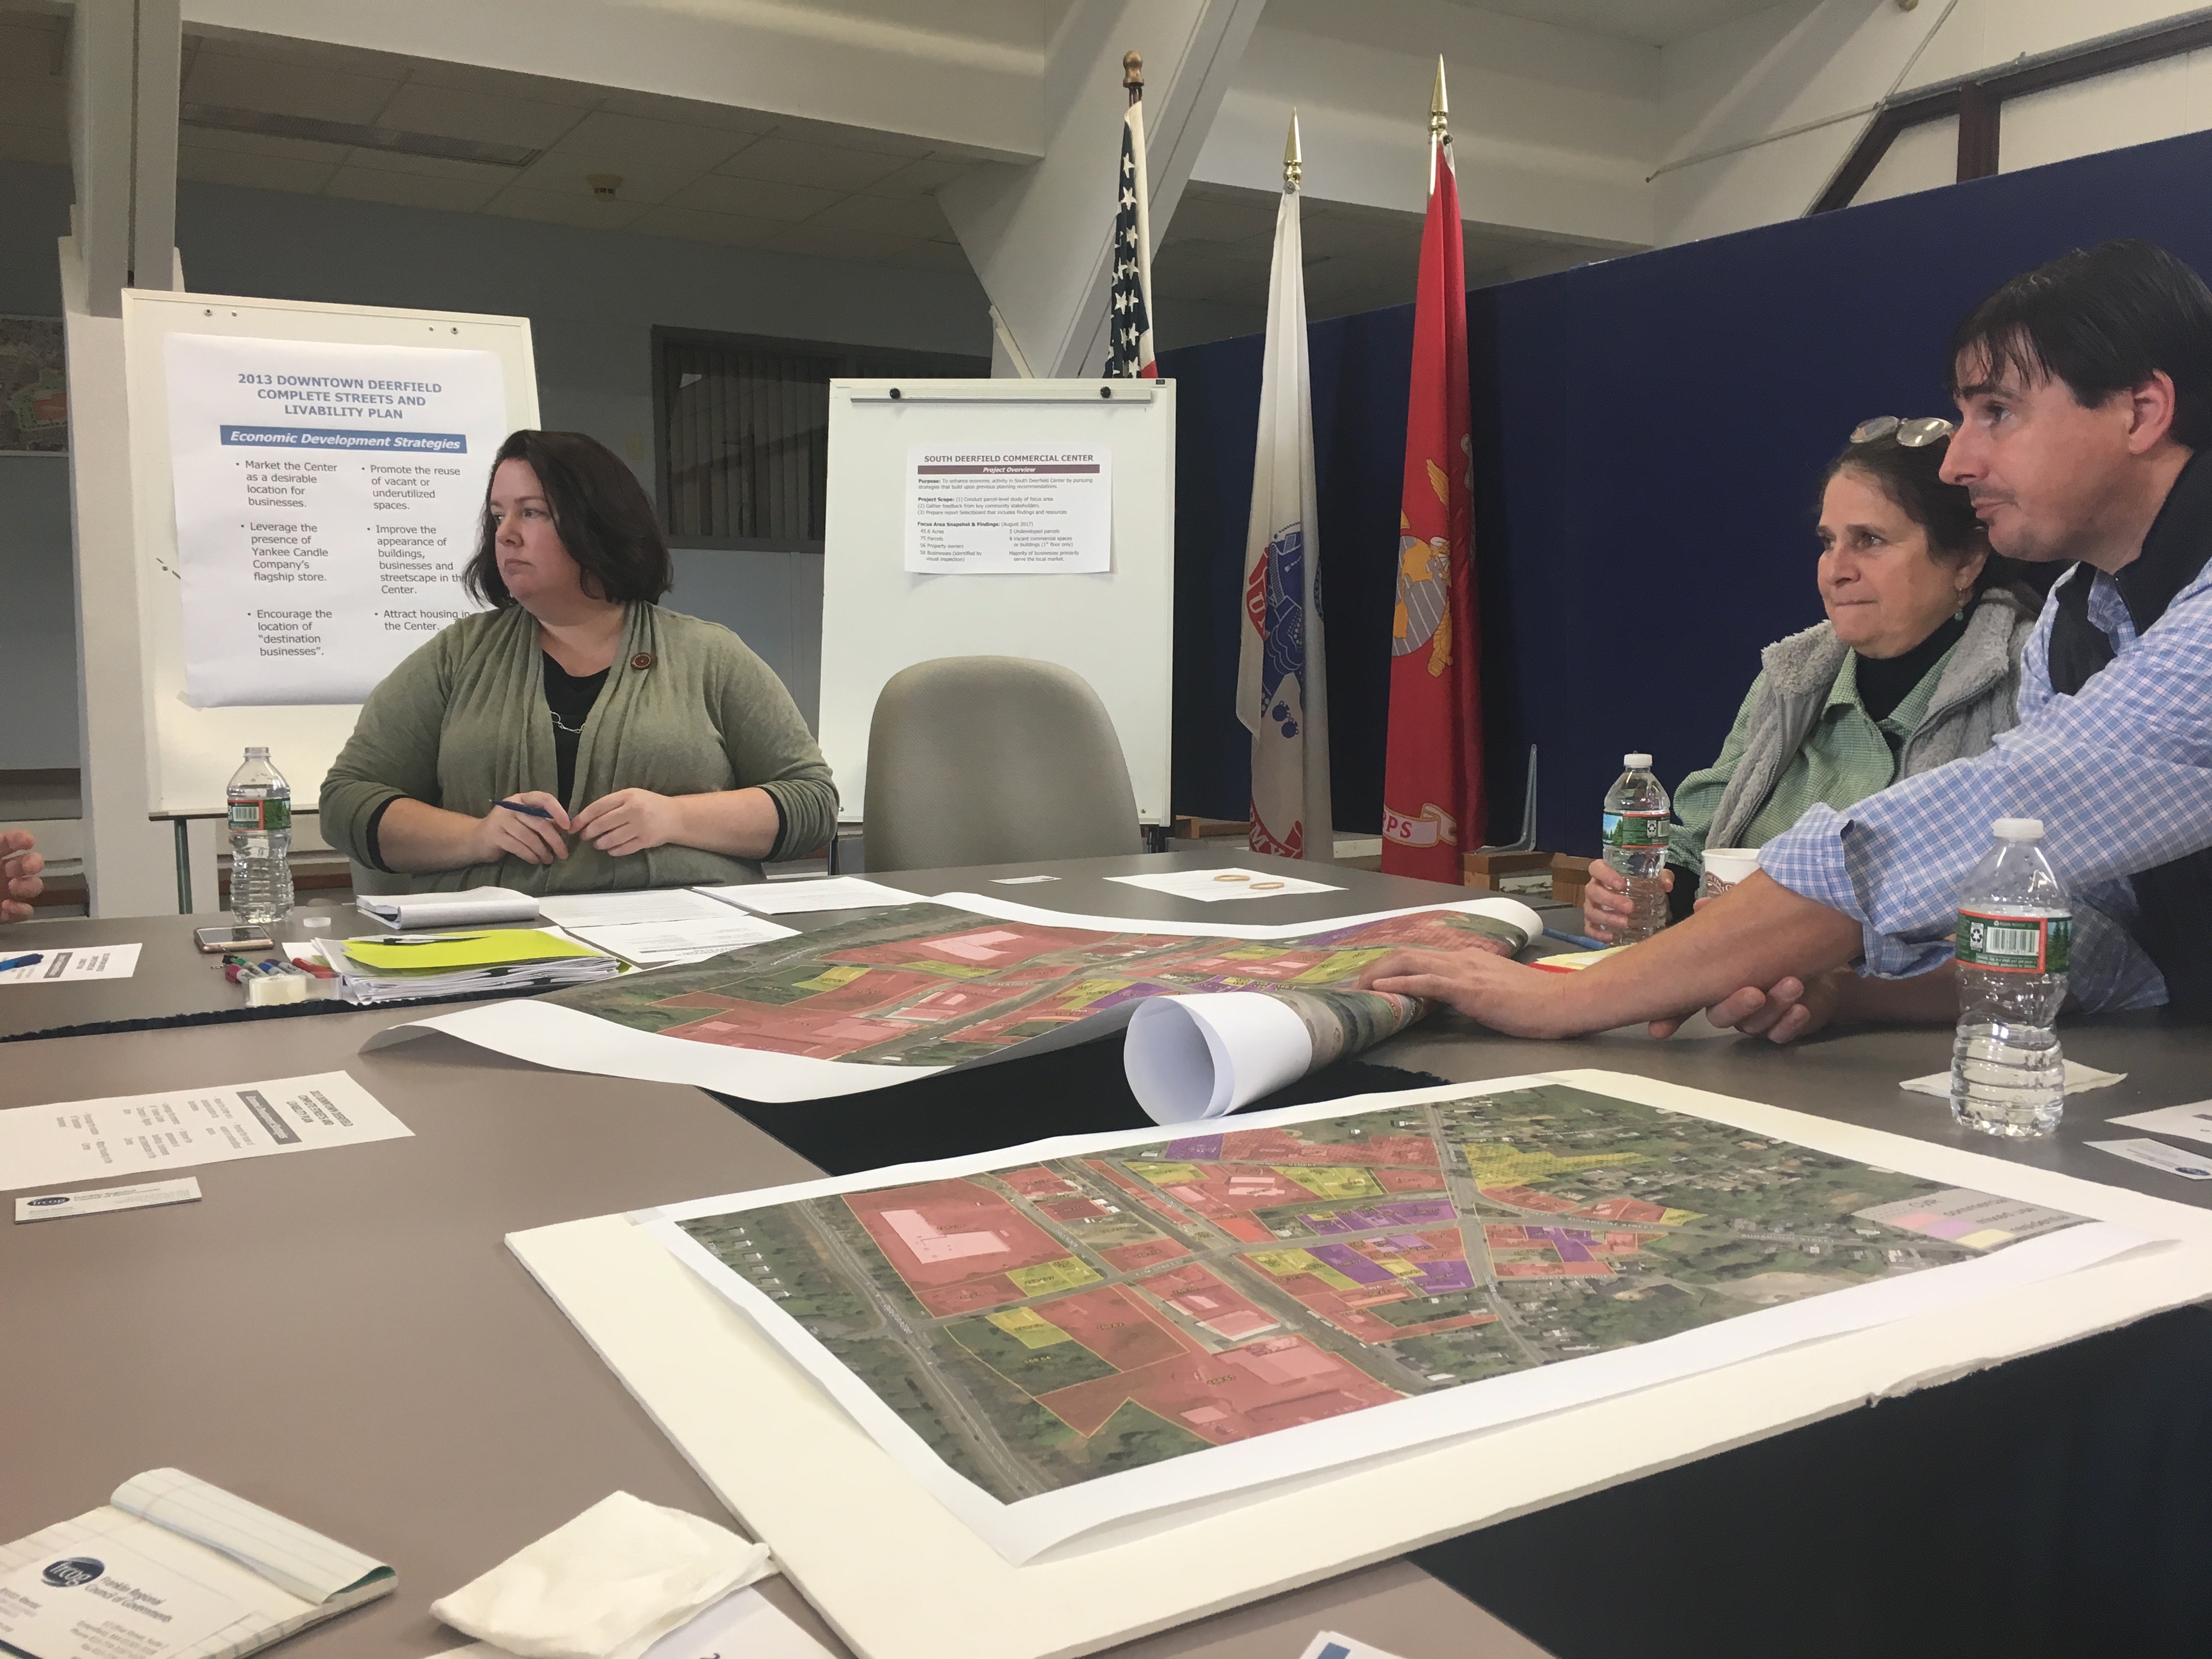 Jessica Atwood, from FRCOG, Wendy Foxmyn, Deerfield Town Administrator, and Selectboard member Trevor McDaniel join citizens discussing strategies to improve downtown South Deerfield at a meeting in Town Hall.